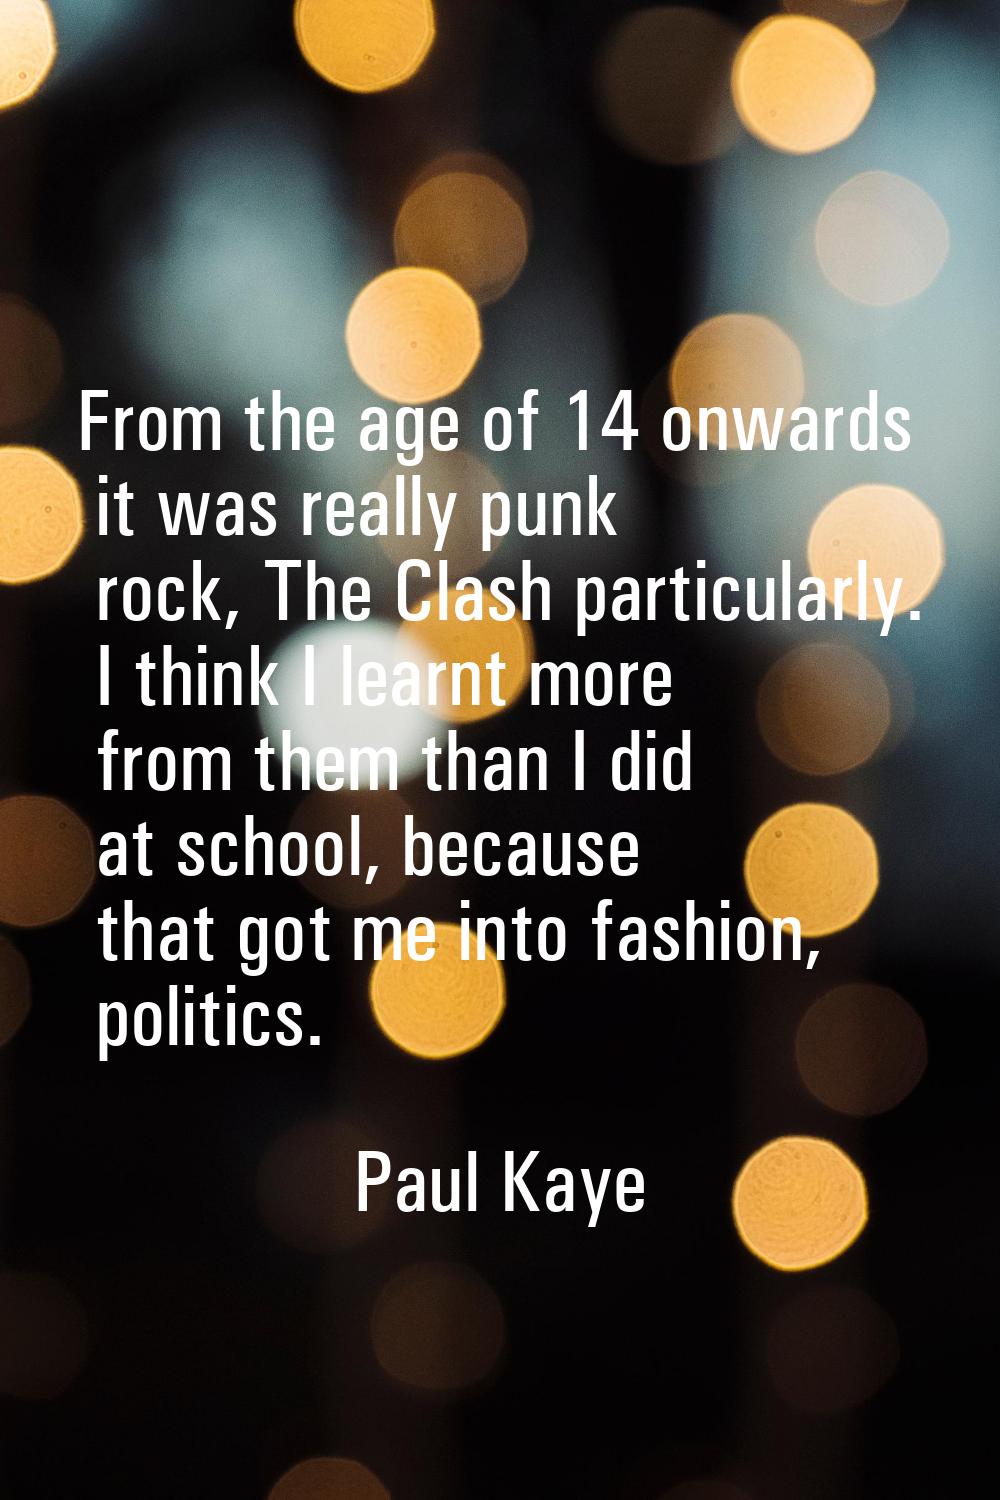 From the age of 14 onwards it was really punk rock, The Clash particularly. I think I learnt more f